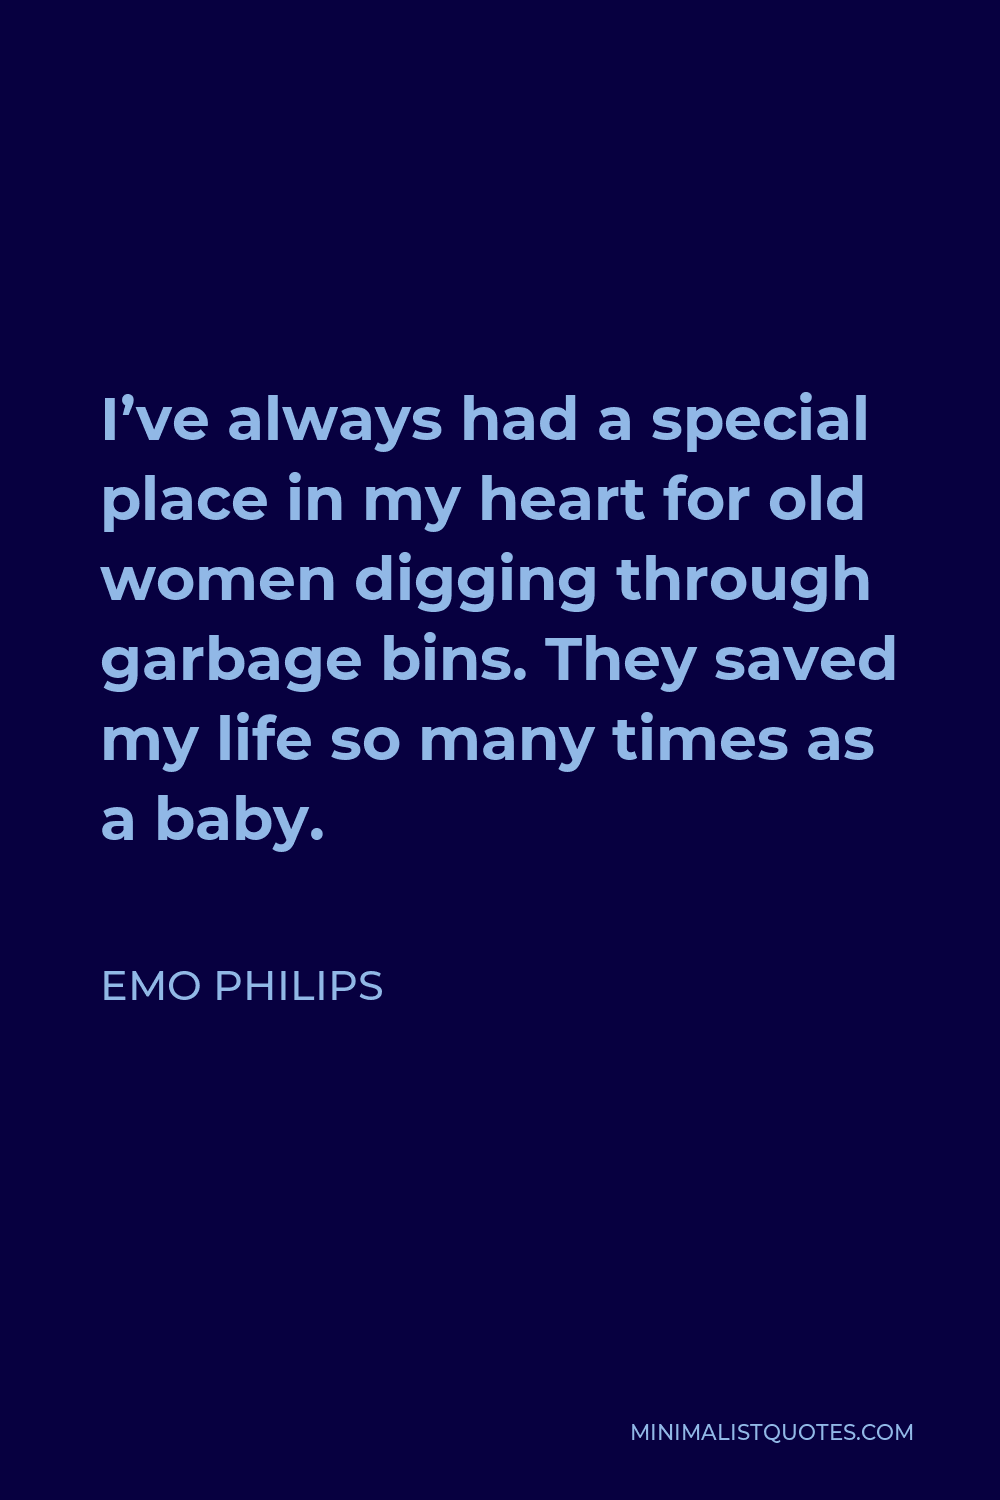 Emo Philips Quote - I’ve always had a special place in my heart for old women digging through garbage bins. They saved my life so many times as a baby.